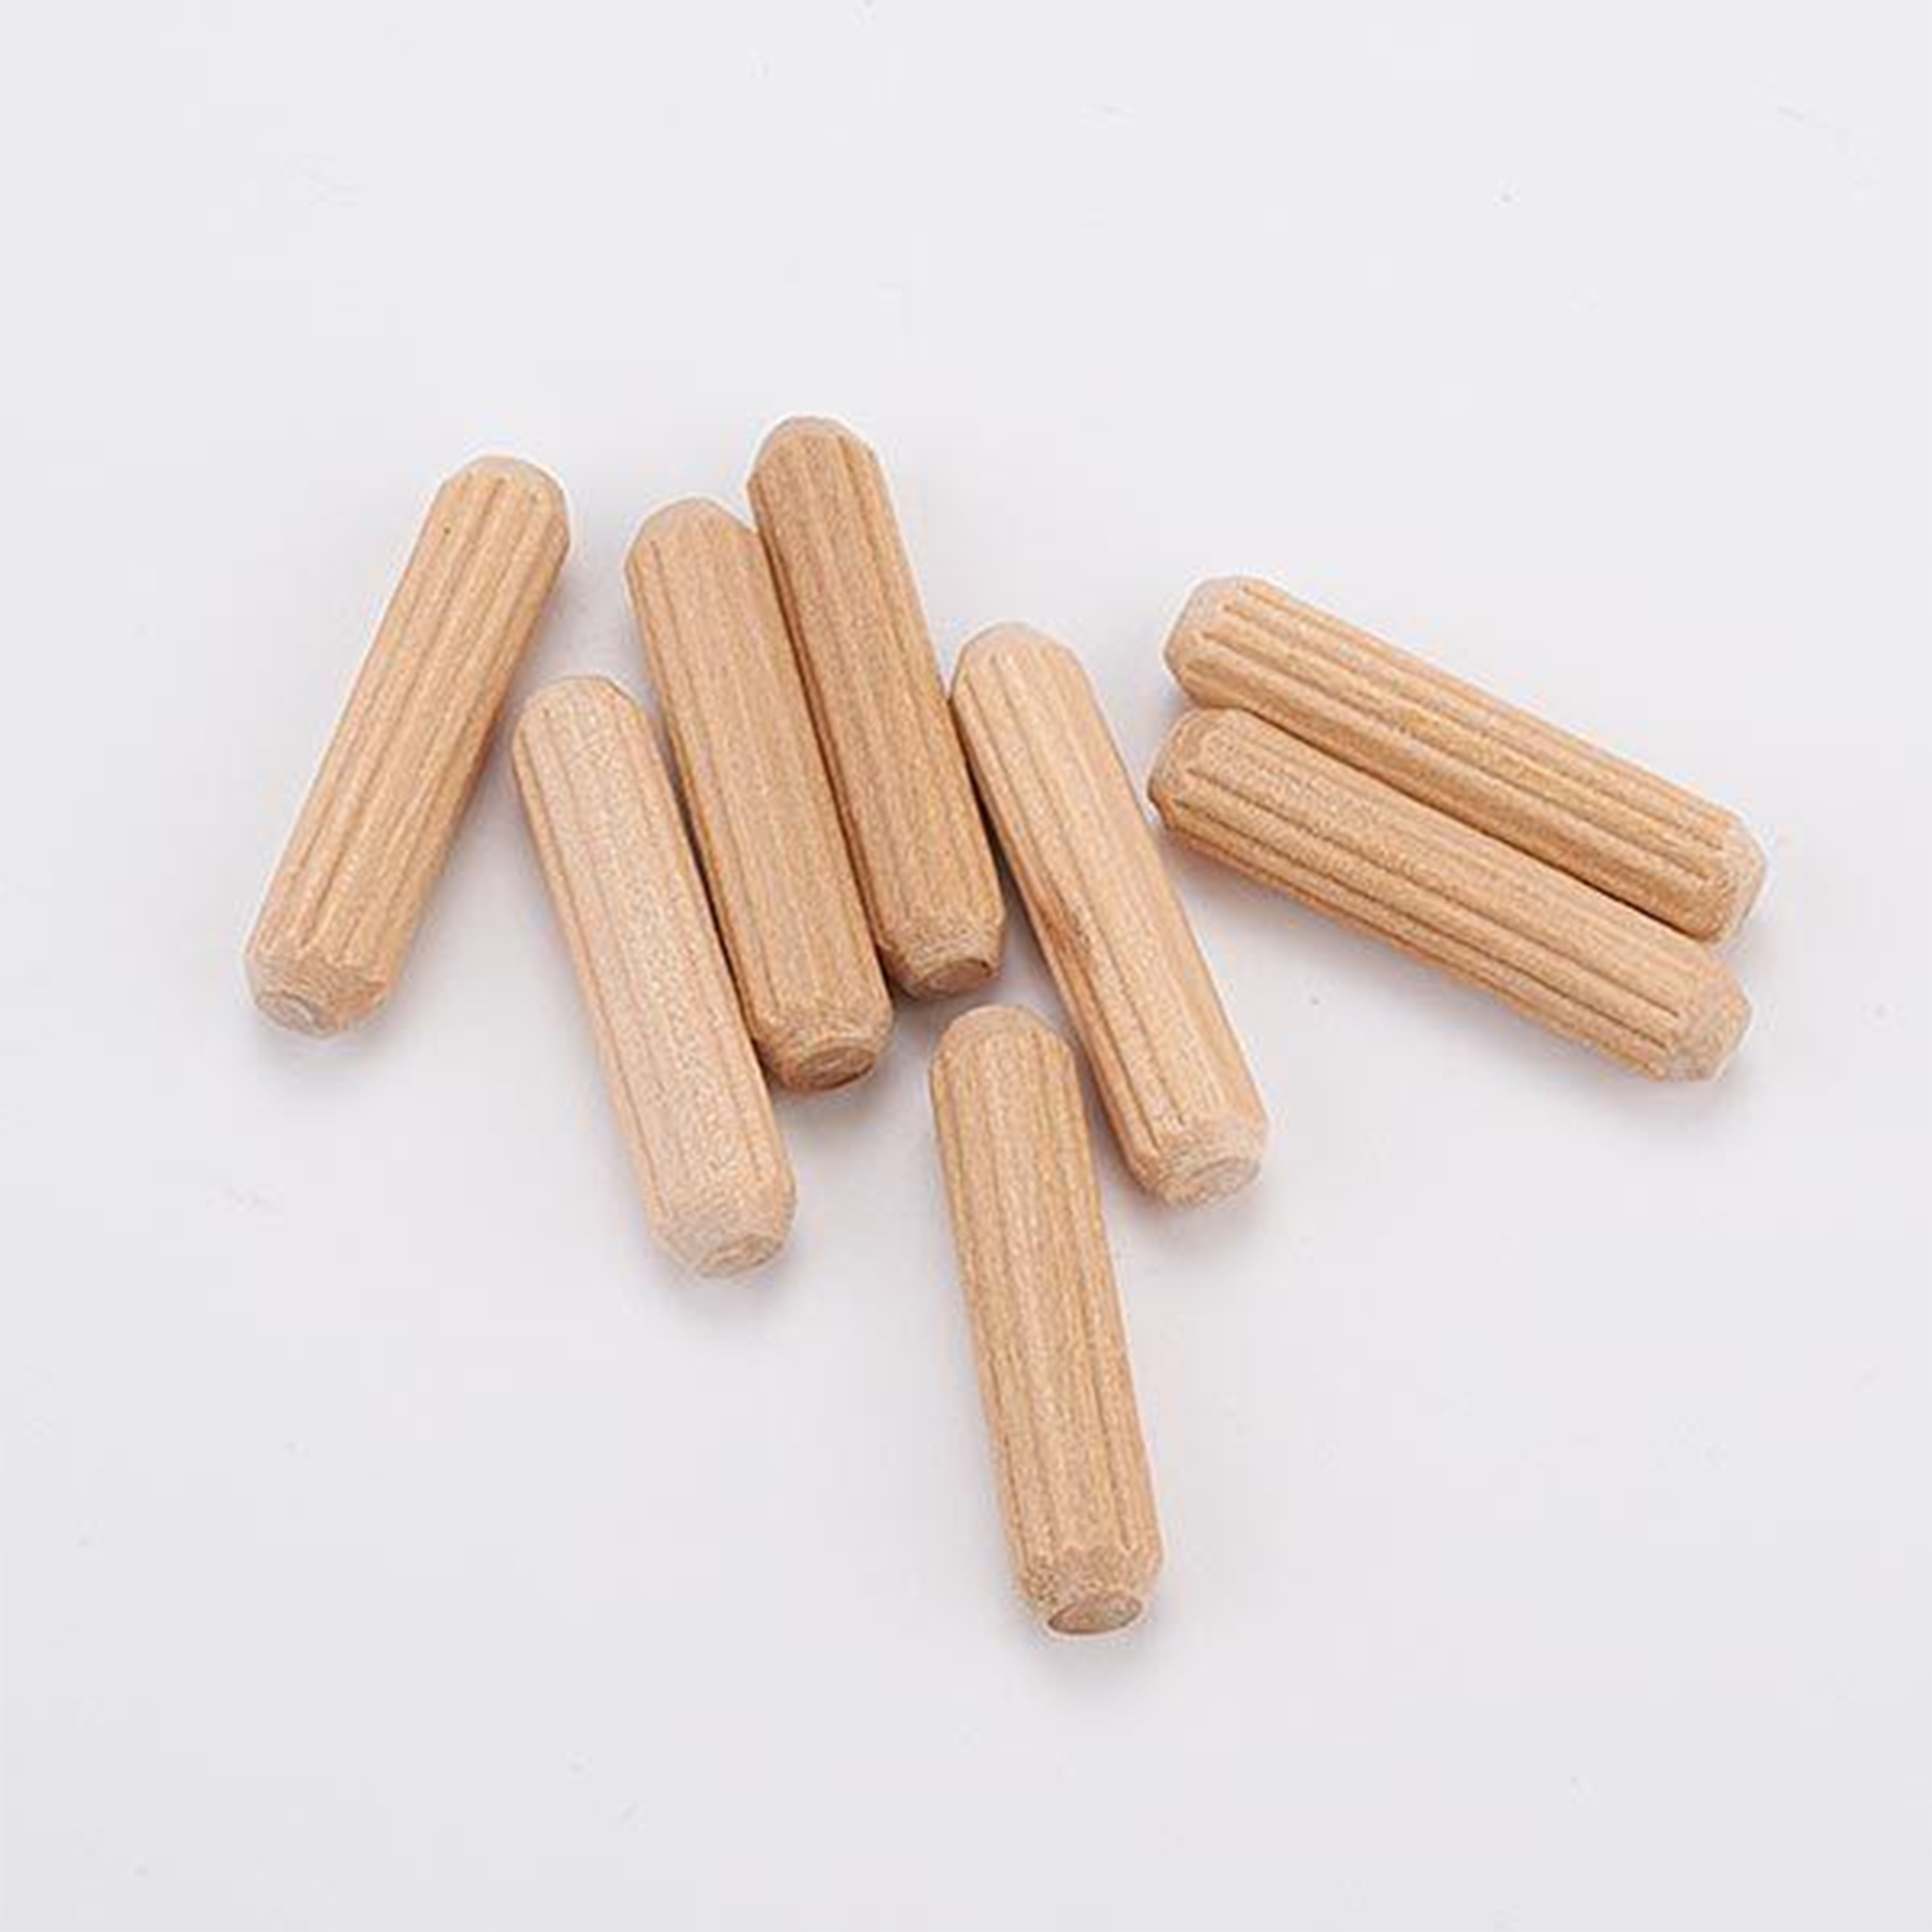 50-count 1/4-inch Fluted Dowel Pins